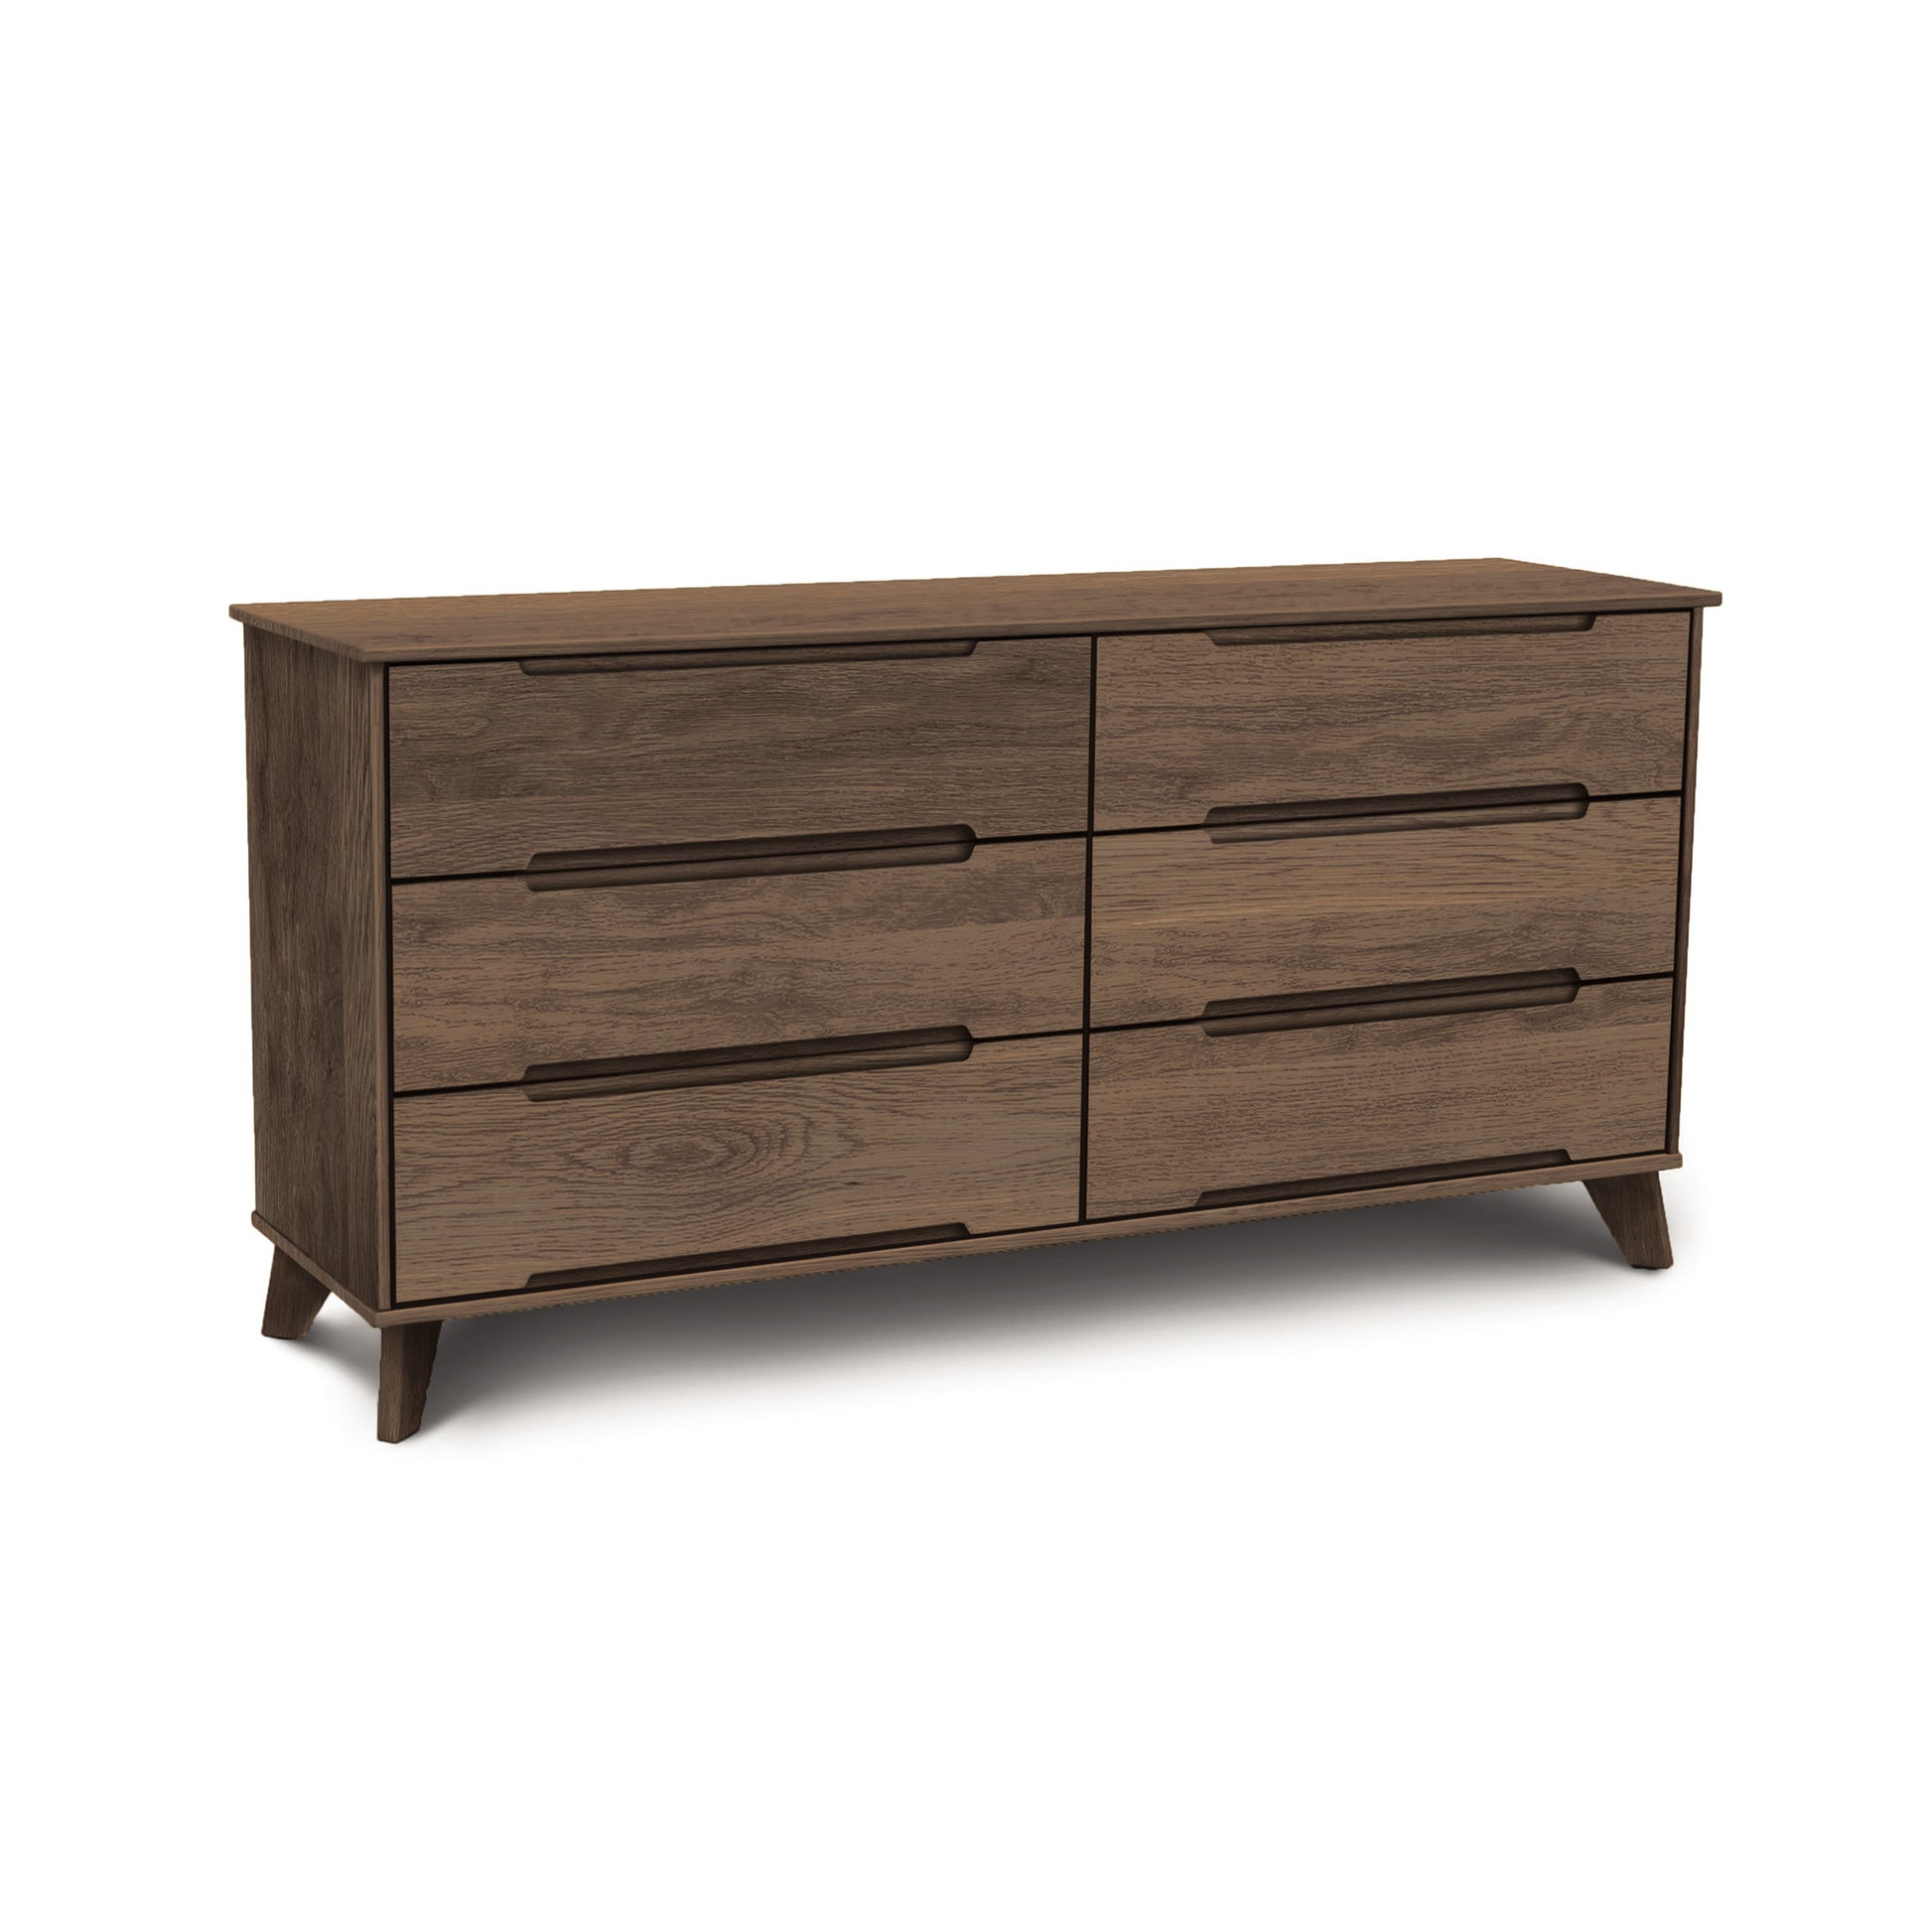 A Linn 6-Drawer Dresser from Copeland Furniture with a dark finish and angled legs, embodying the mid-century modern aesthetic.